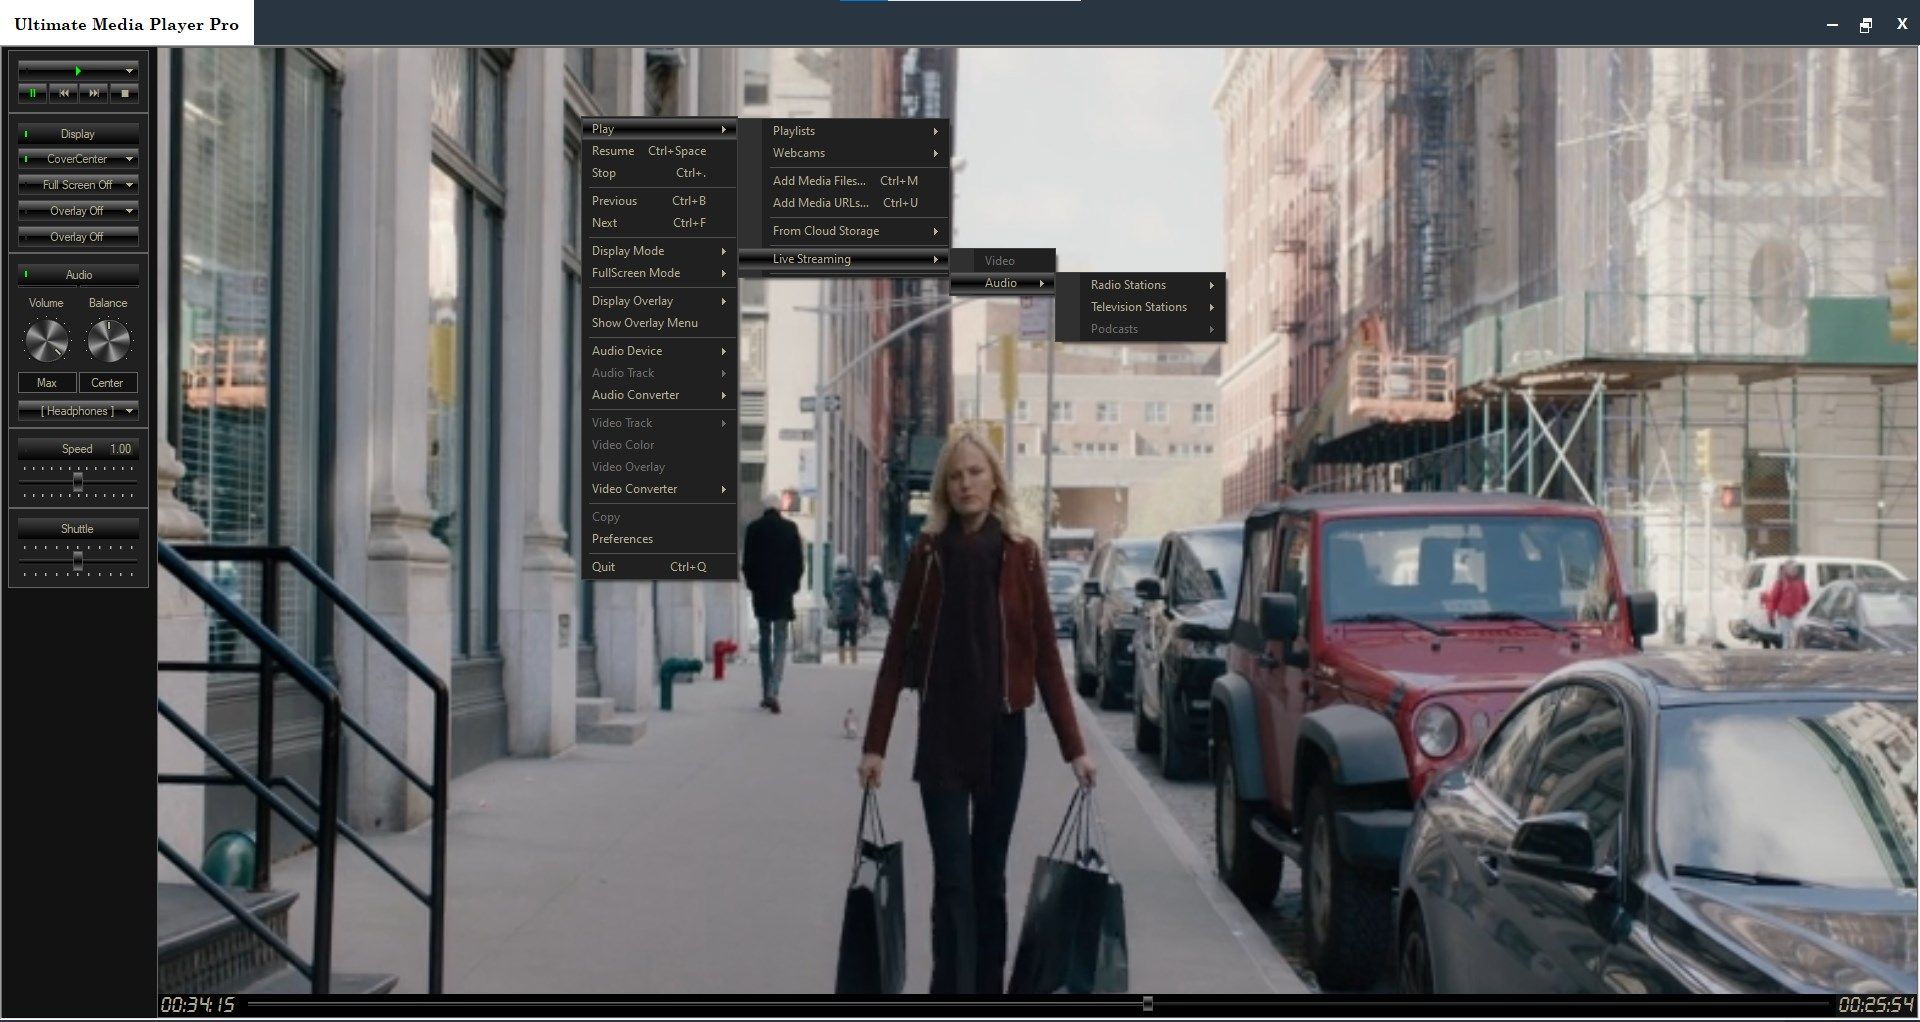 Ultimate Media Player Pro